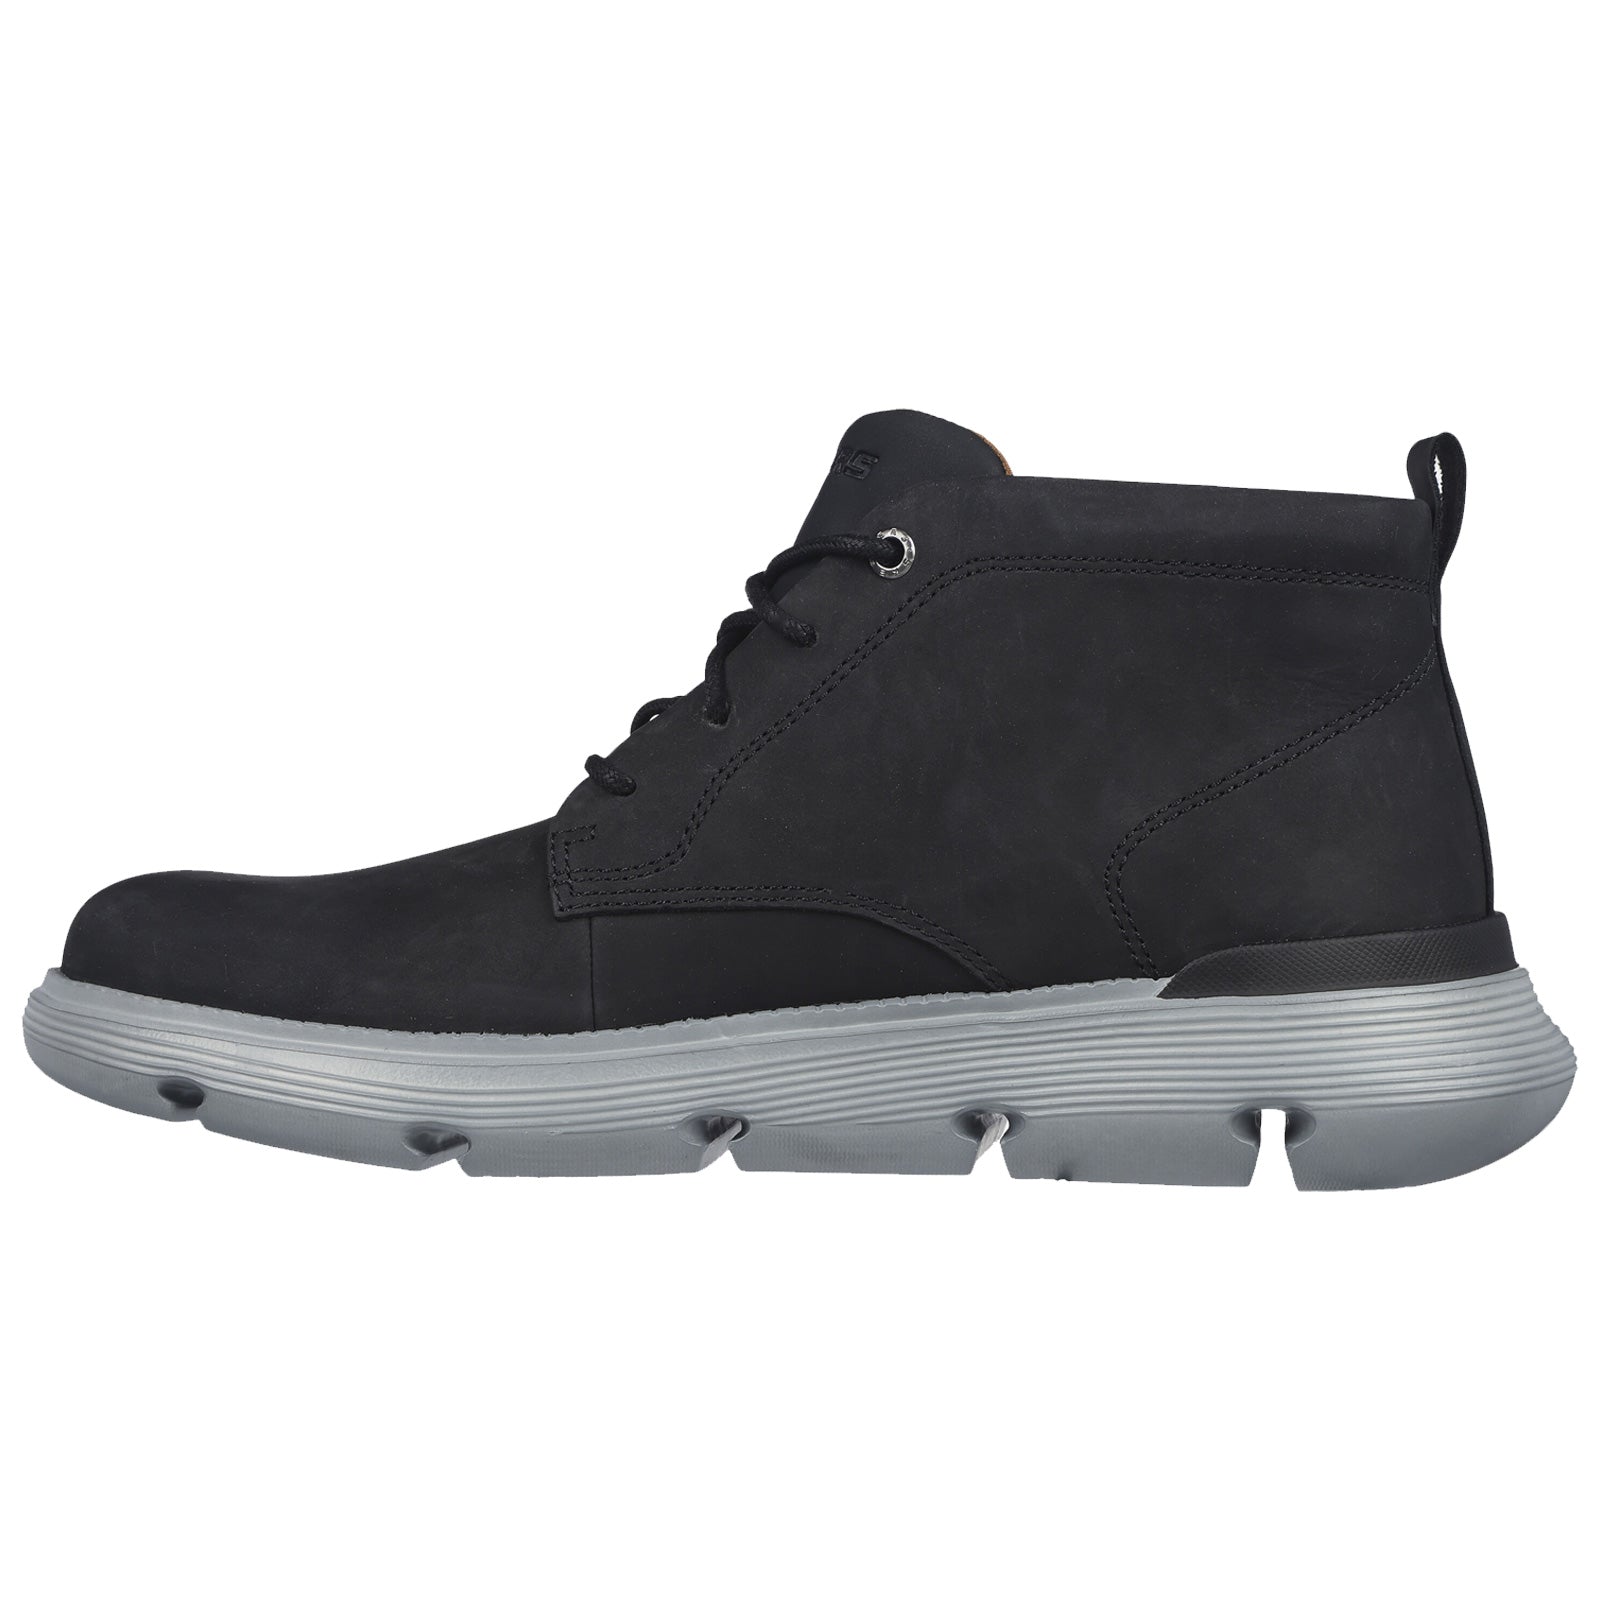 Skechers Mens Garza Fontaine Boots